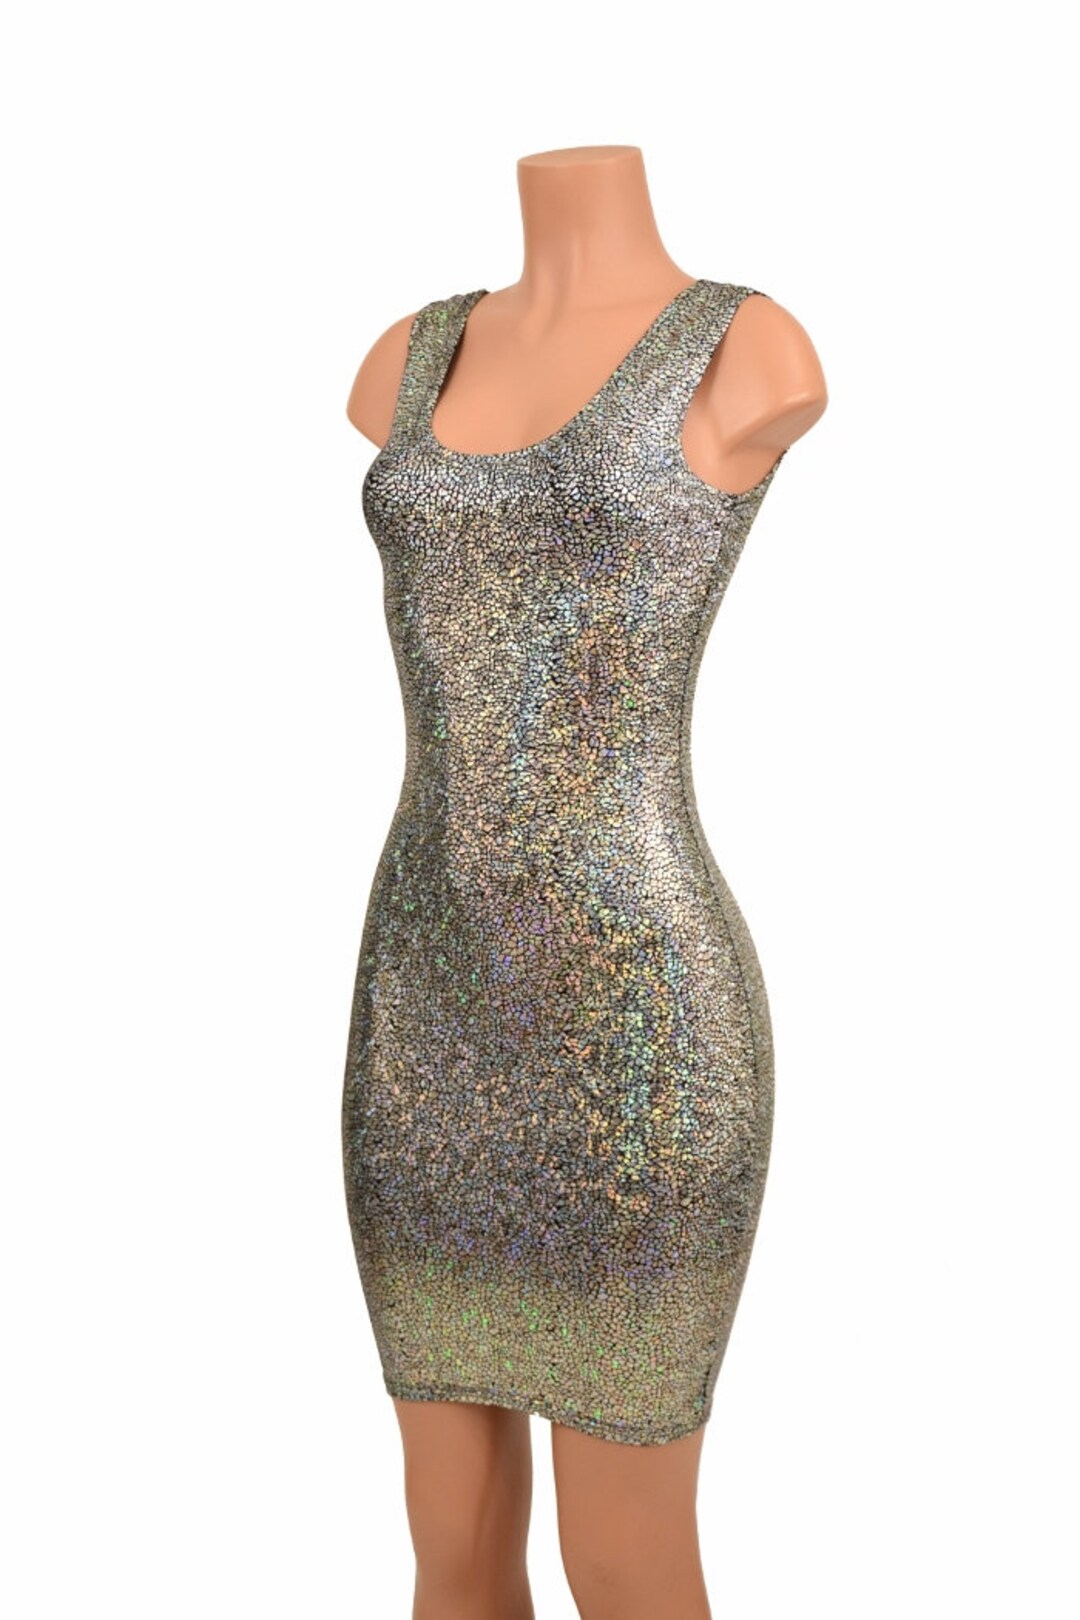 Silver in Black Shattered Glass Tank Style Metallic Bodycon - Etsy